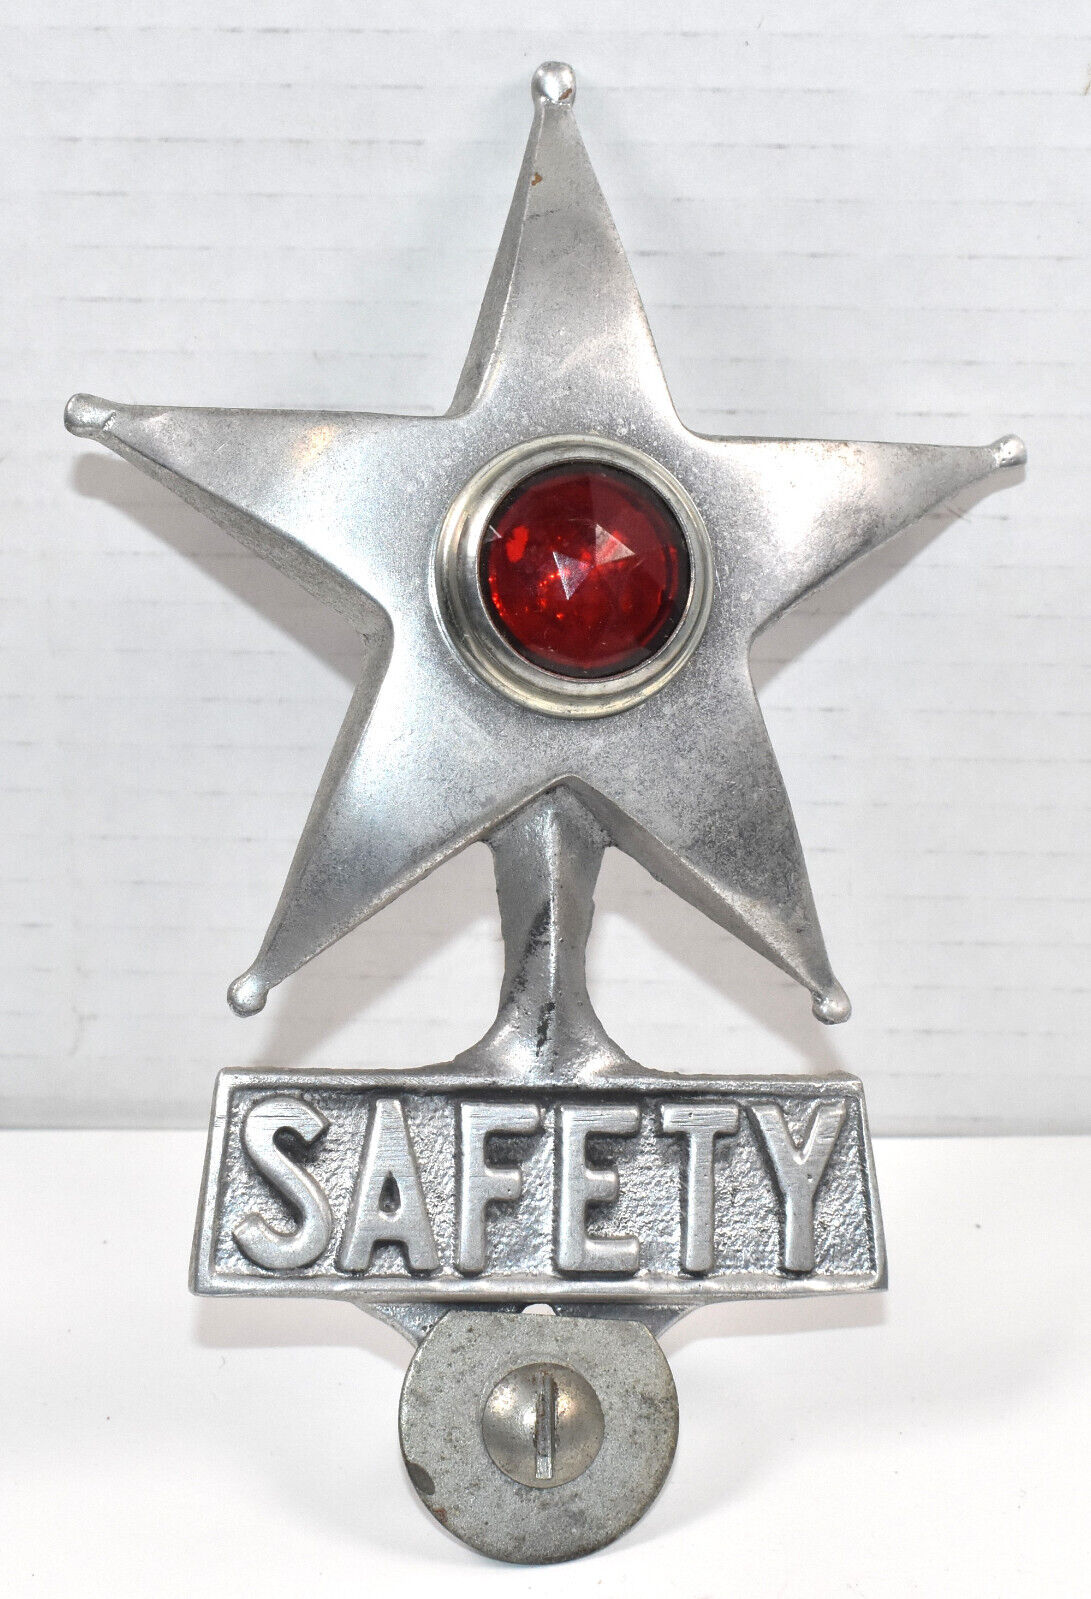 Vintage Safety Star License Plate Topper with Red Reflector